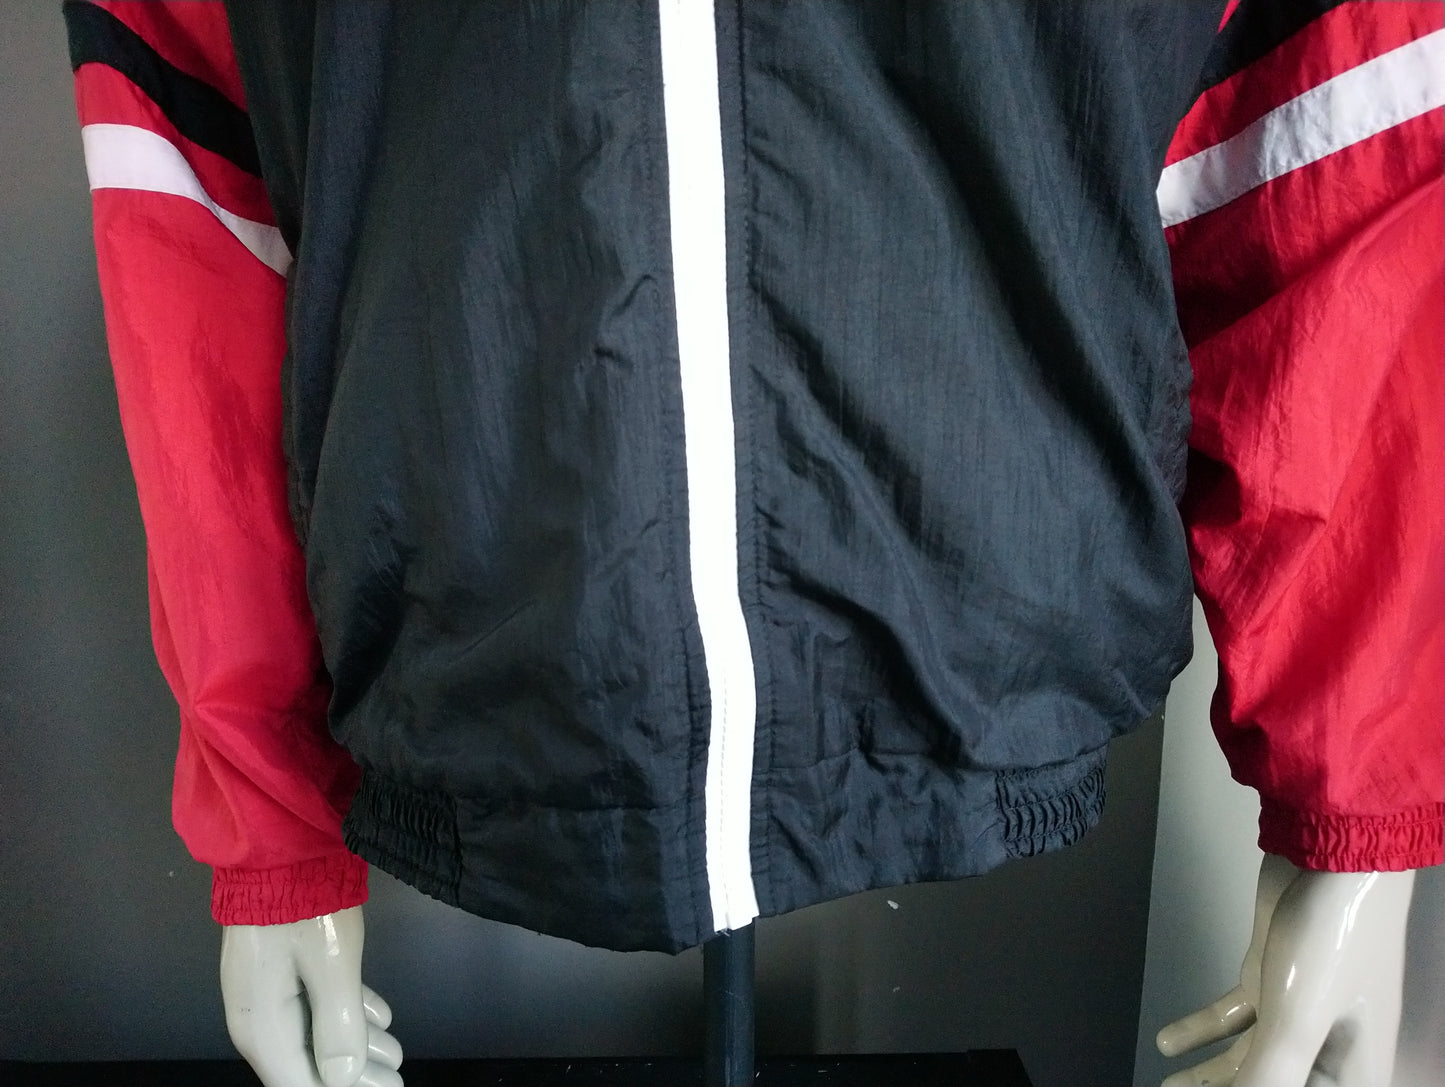 Vintage contender 80's - 90's sports jacket. Red black and white colored. Size L / XL.